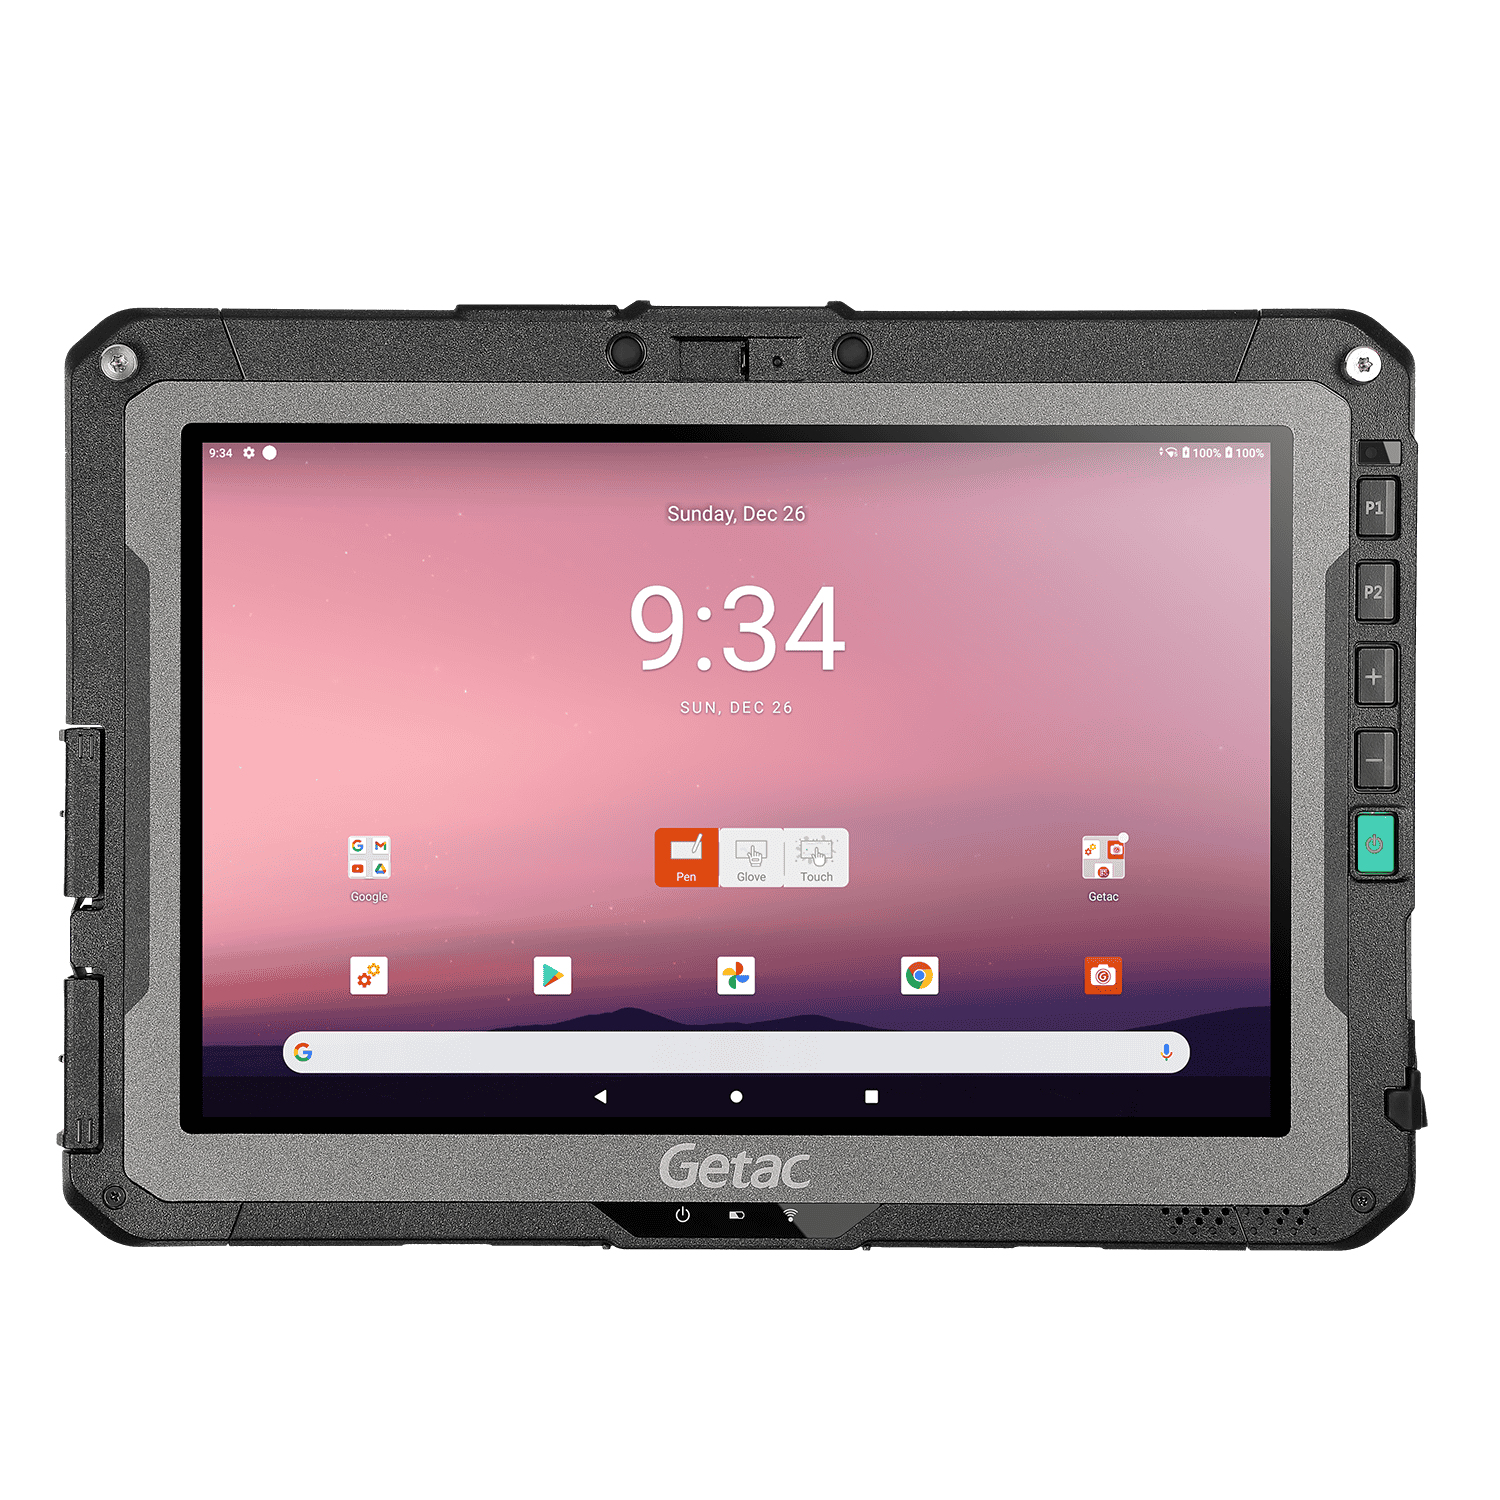 Z2A7BXWI5ABC GETAC ZX10, USB, USB-C, BT (5.0), Wi-Fi, NFC, GPS, RFID, Android, GMS